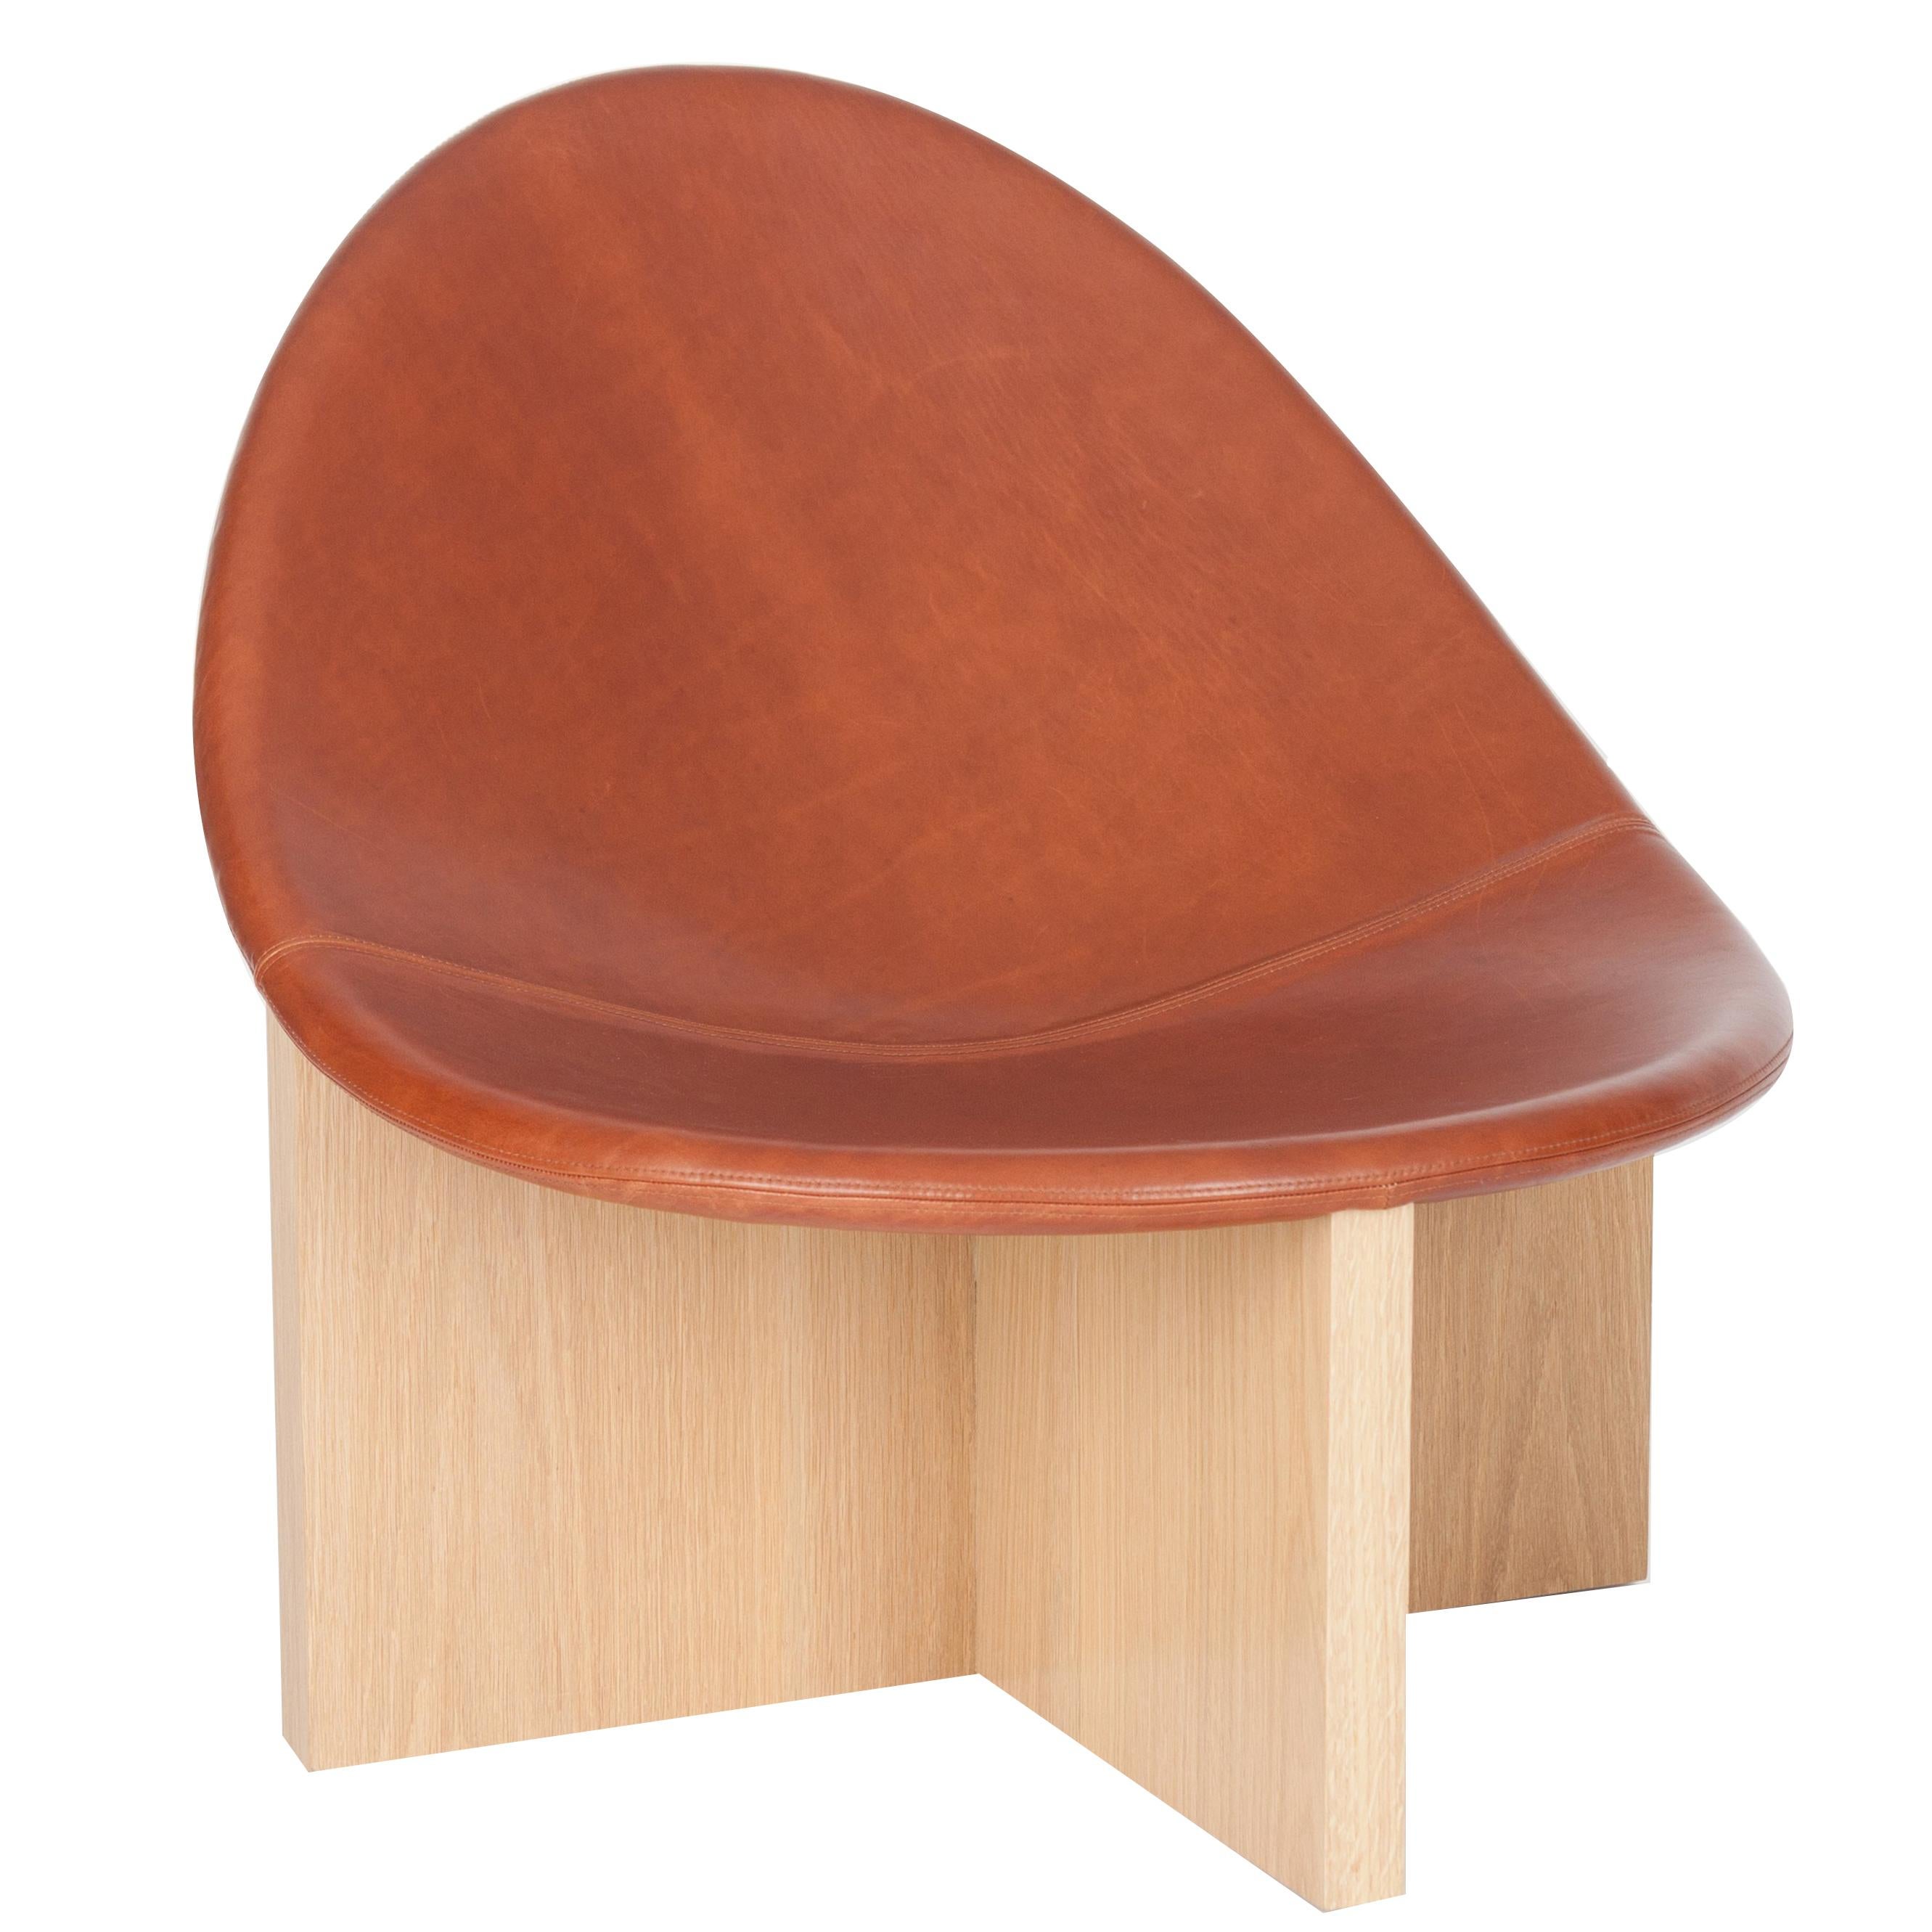 NIDO Modern Lounge Chair in Solid Maple & Cognac Leather by Estudio Persona For Sale